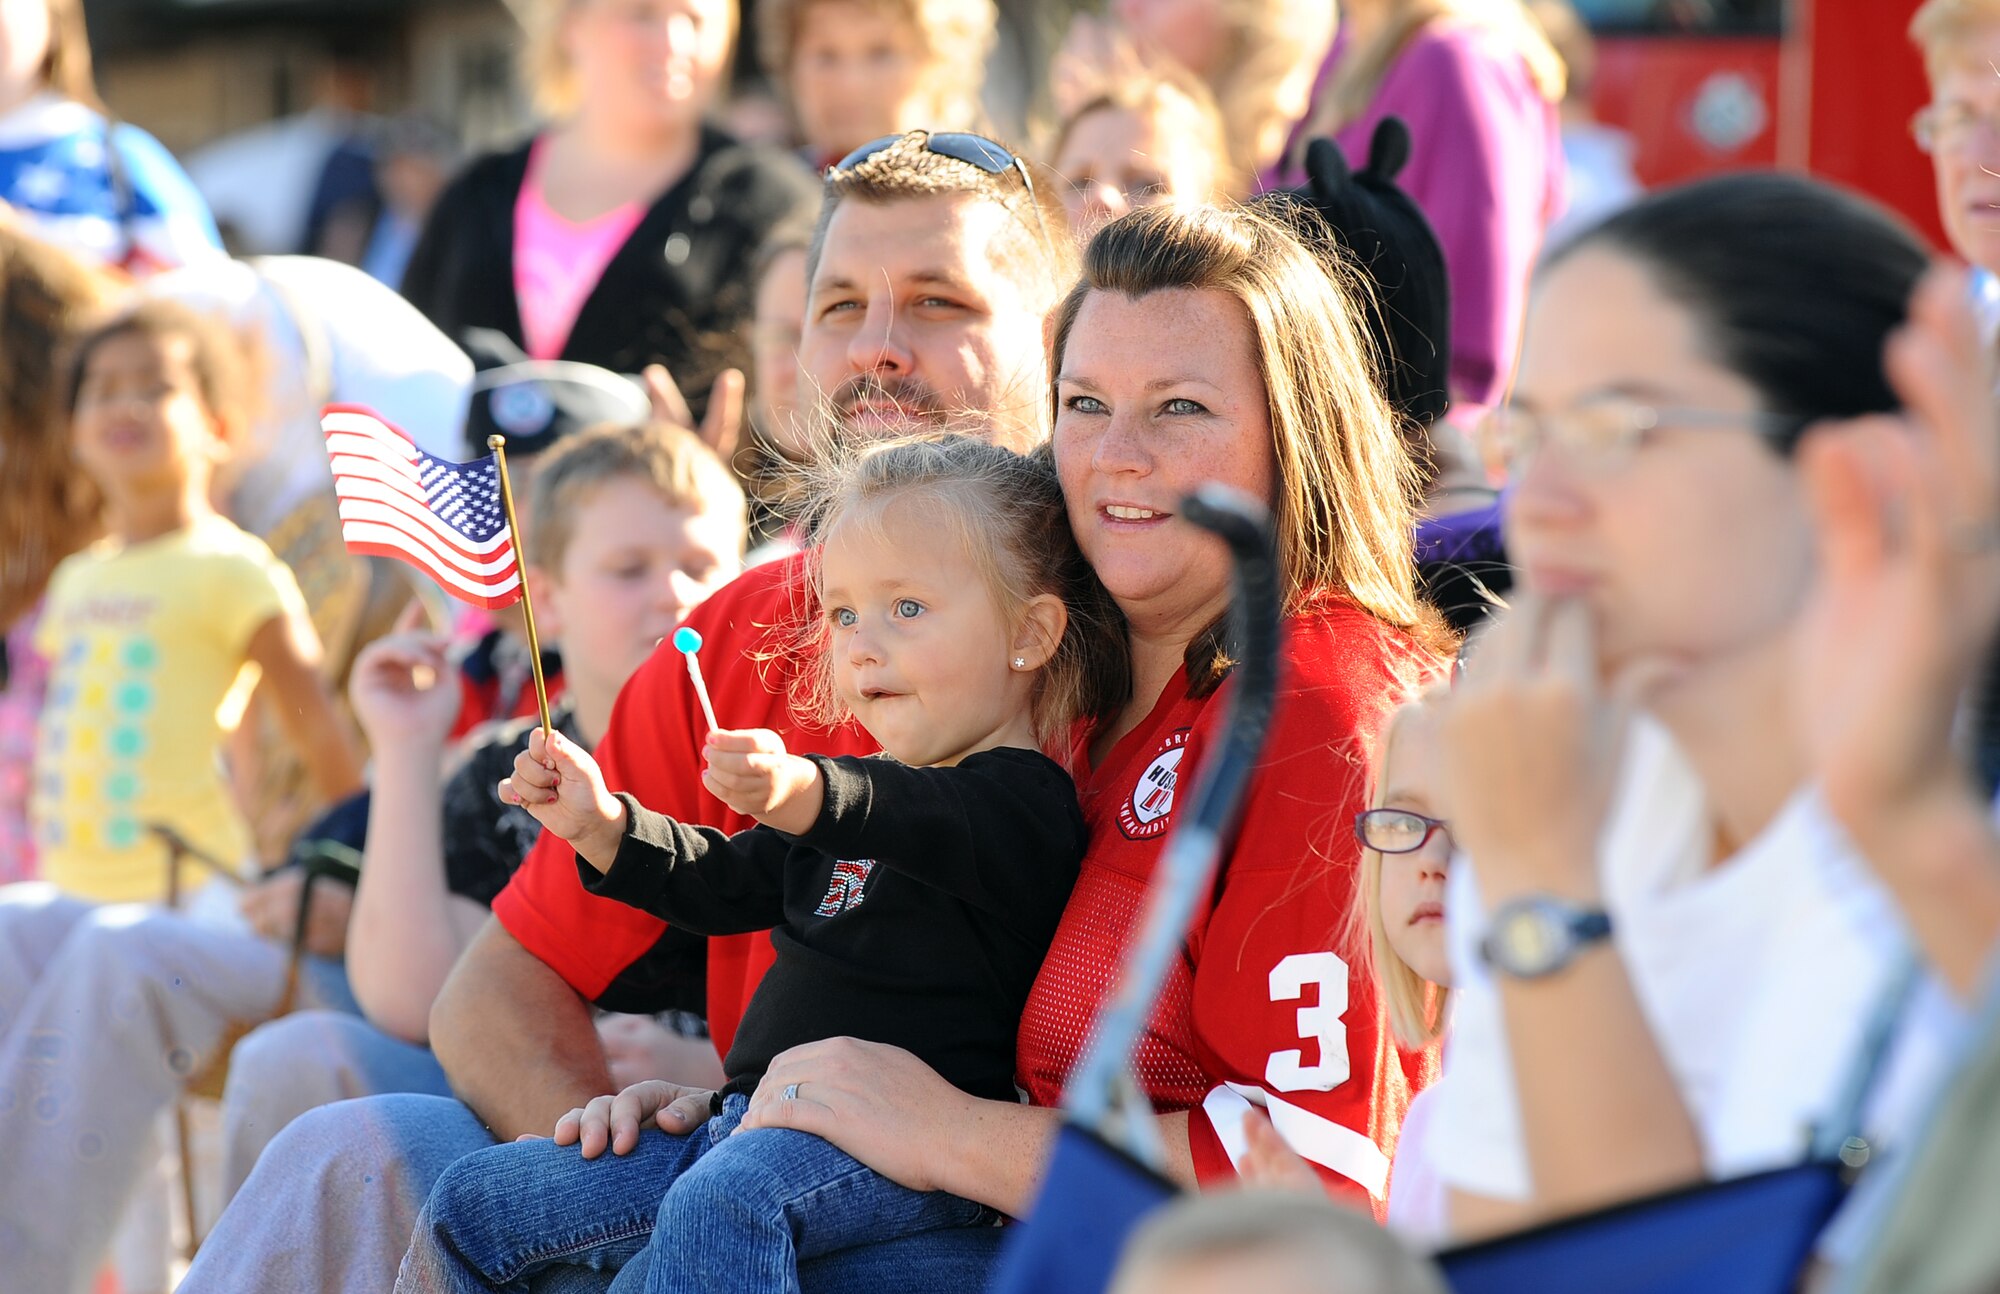 Josie Oseka along with her mom, Channon, and dad, Antone, watch the Veterans Day parade together in Bellevue, Neb., Nov. 10.  The annual parade draws hundreds of metro area families to show their support of our nation’s veterans. (U.S. Air Force Photo by Josh Plueger/Released)